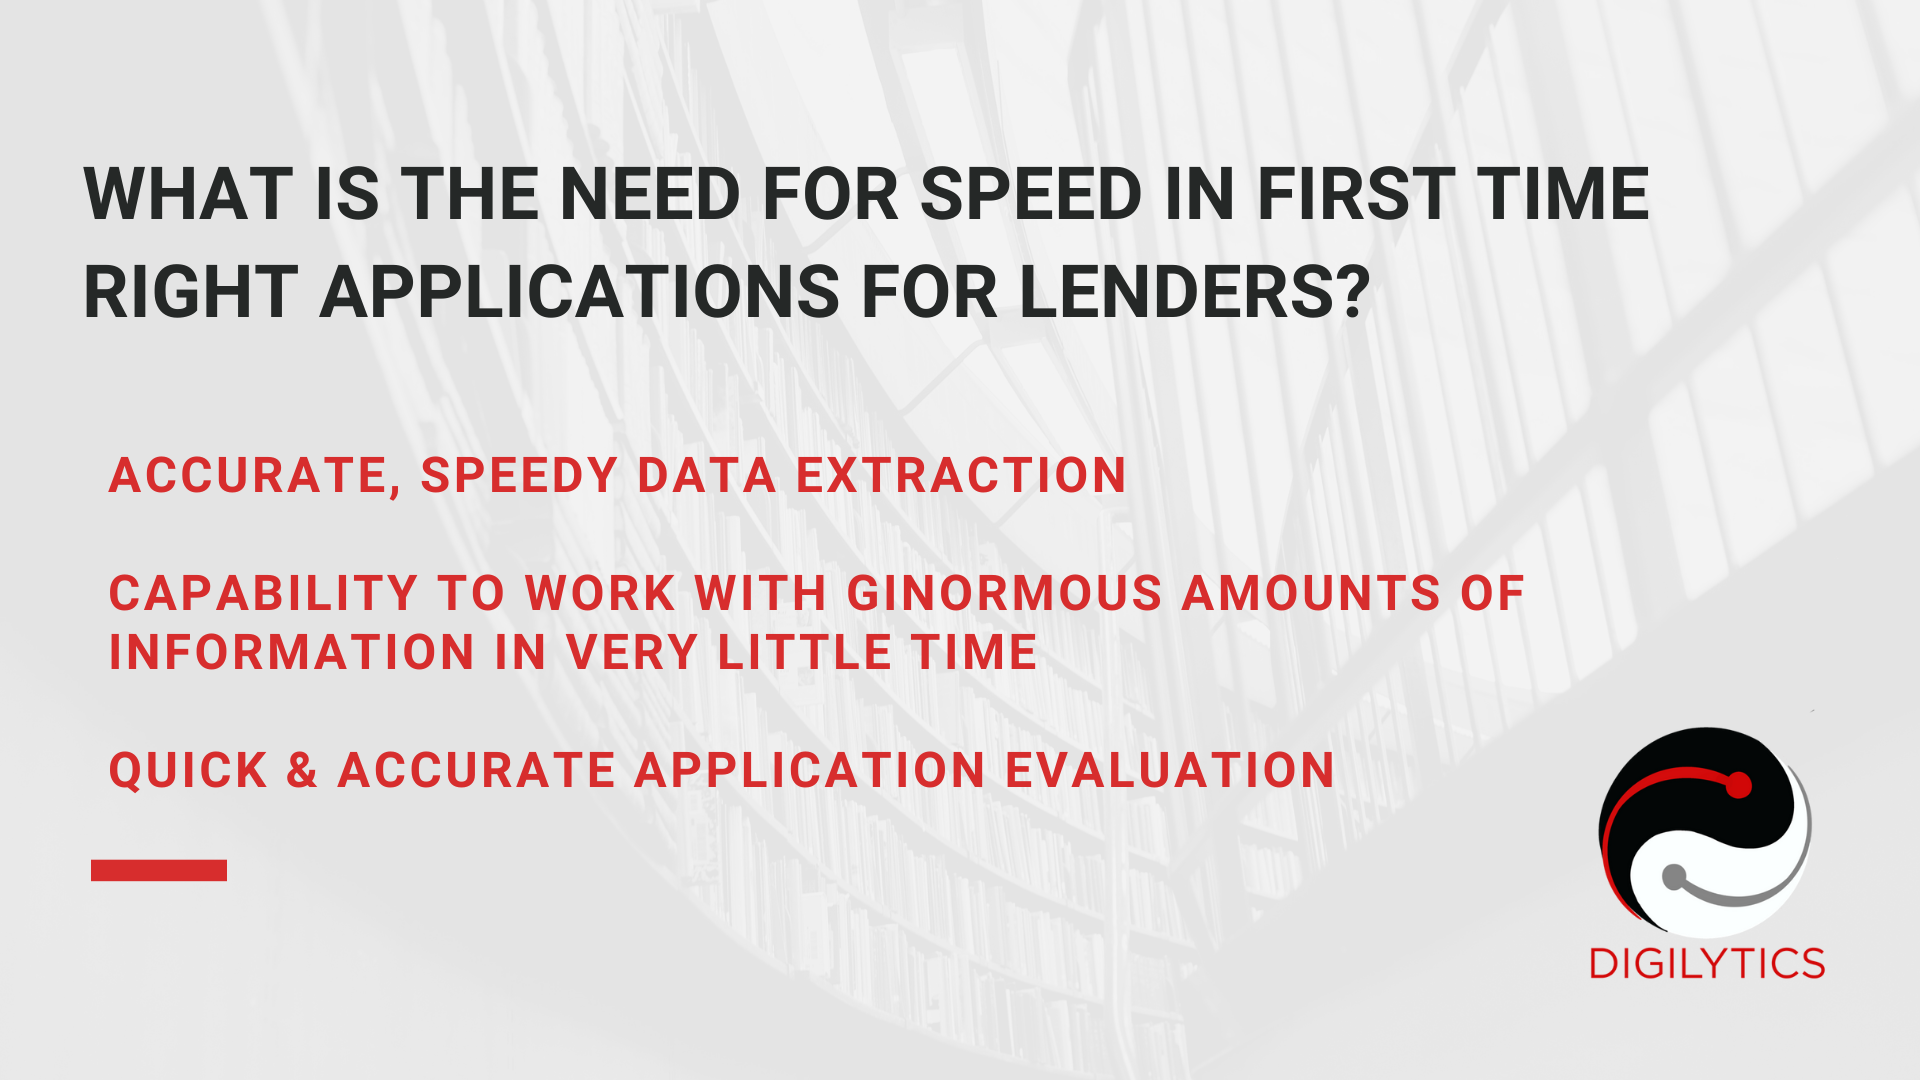 What is the need for speed in first time right applications for lenders?